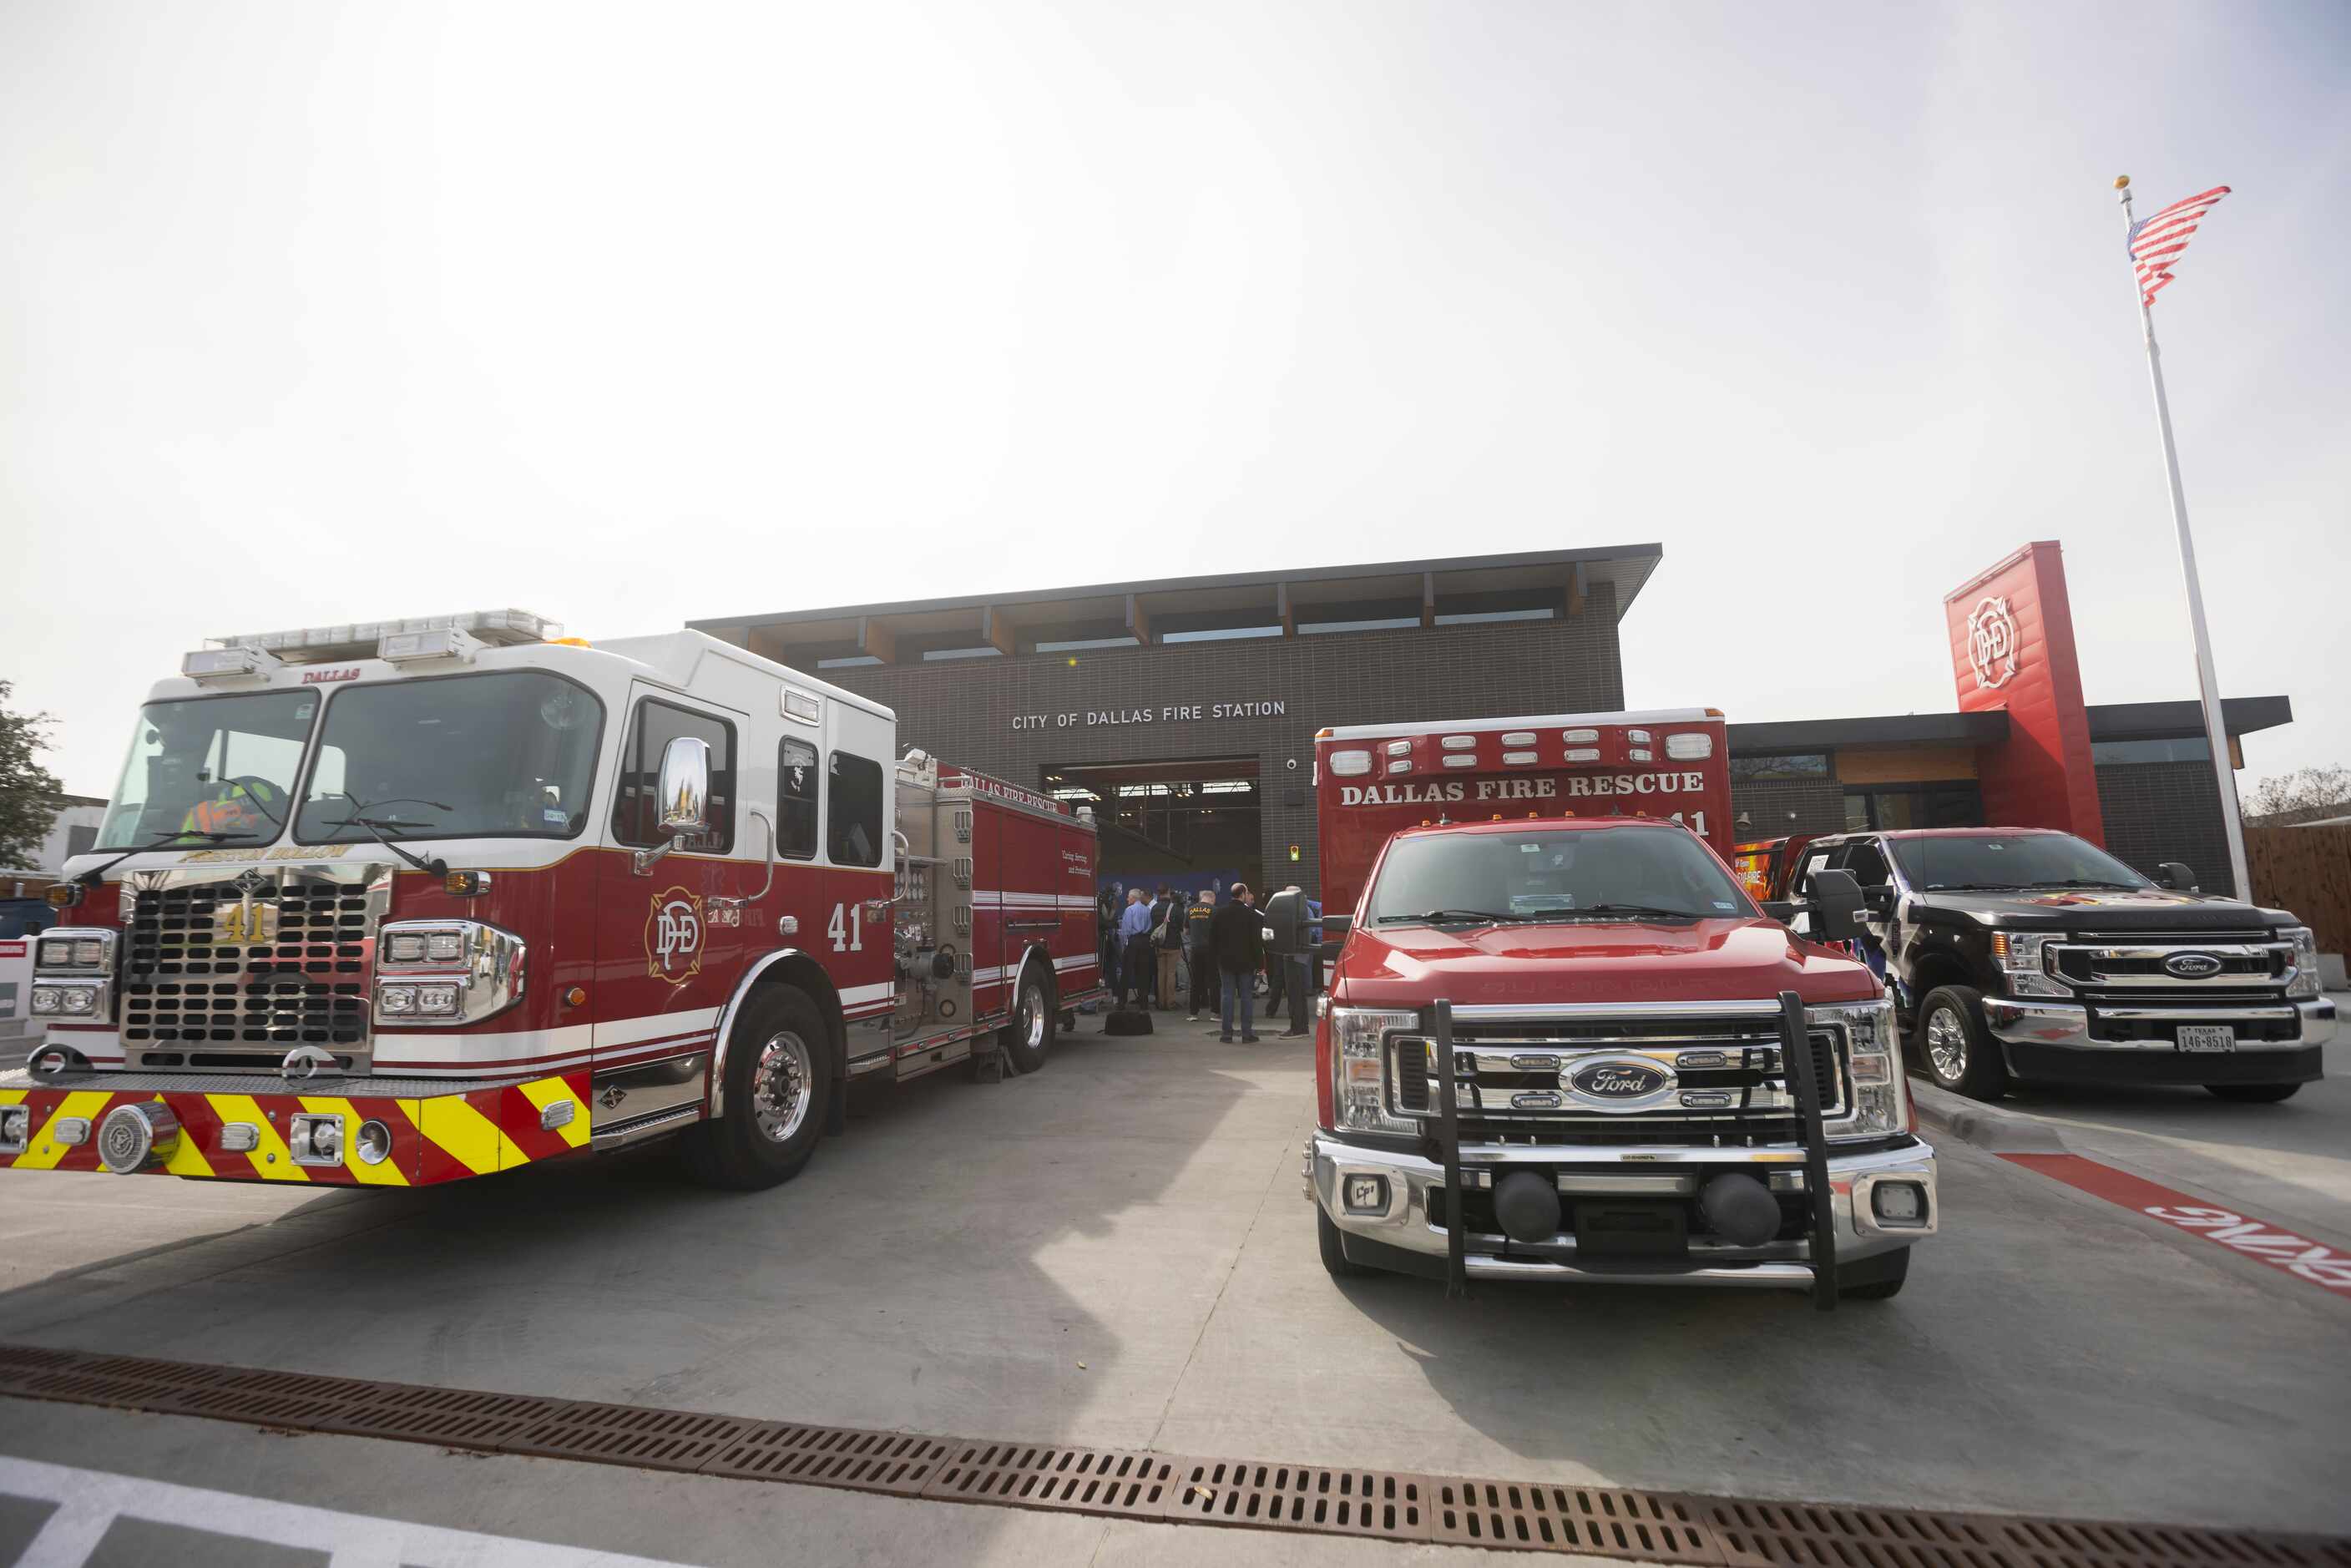 The exterior of the new Dallas Fire Station No. 41 following the grand re-opening ceremony...